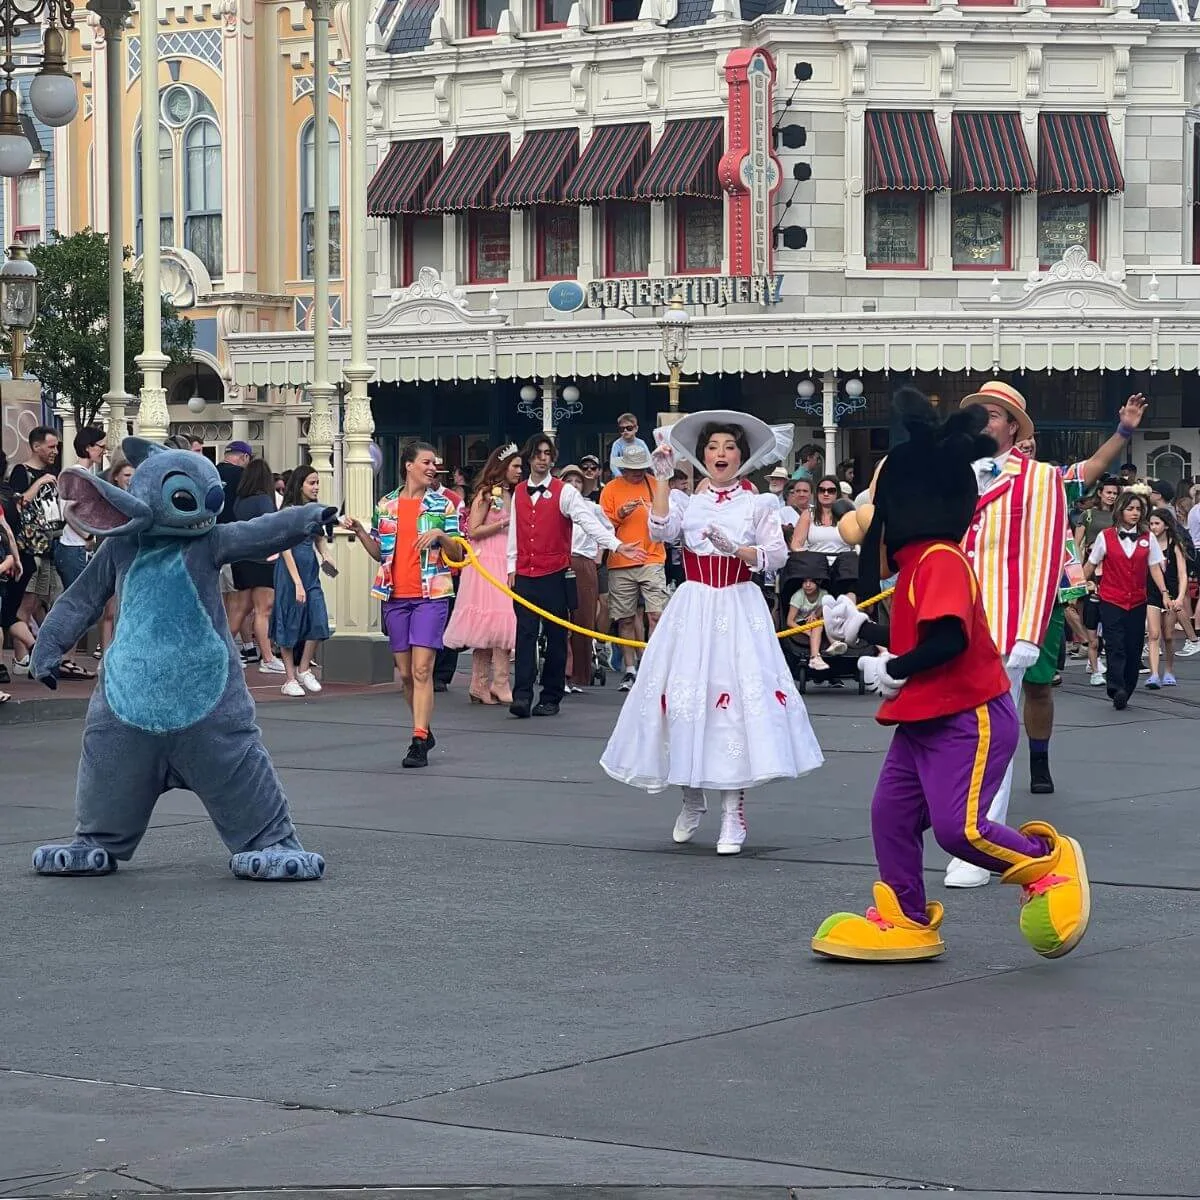 Photo of Stitch, Mary Poppins, Max, and other characters at the end of the Adventure Friends Character Calvacade.